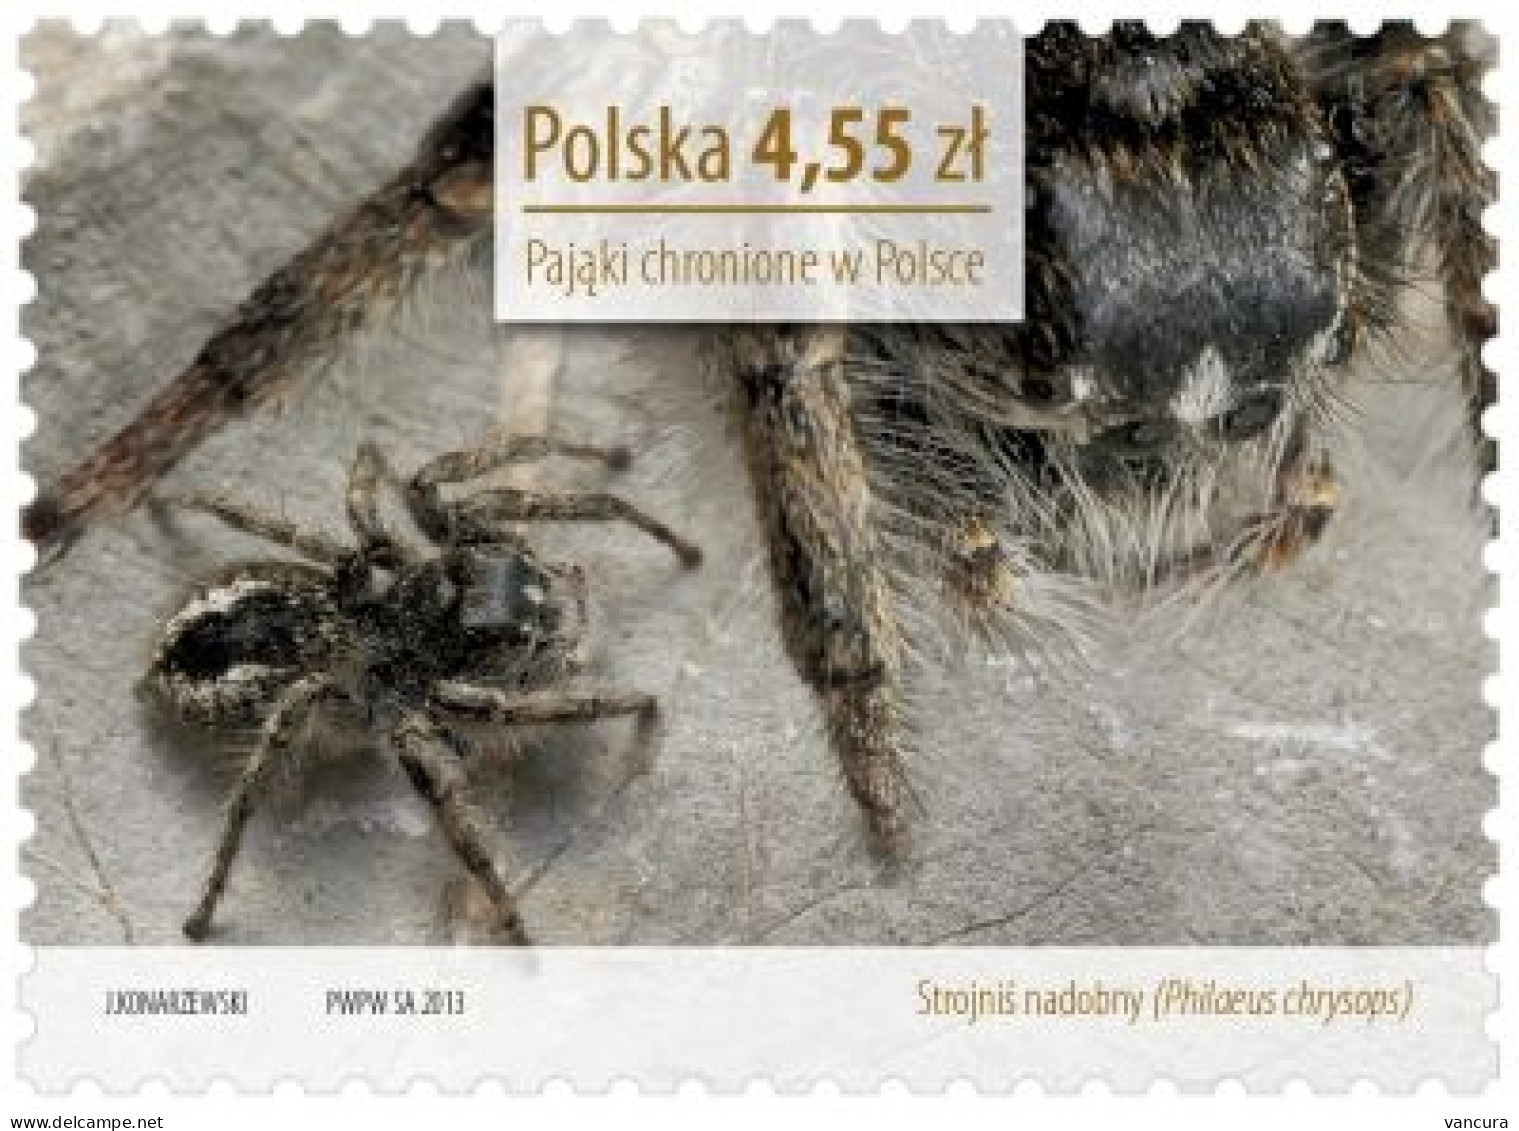 ** 4504-7 Poland Protected Spiders 2013 - Spiders